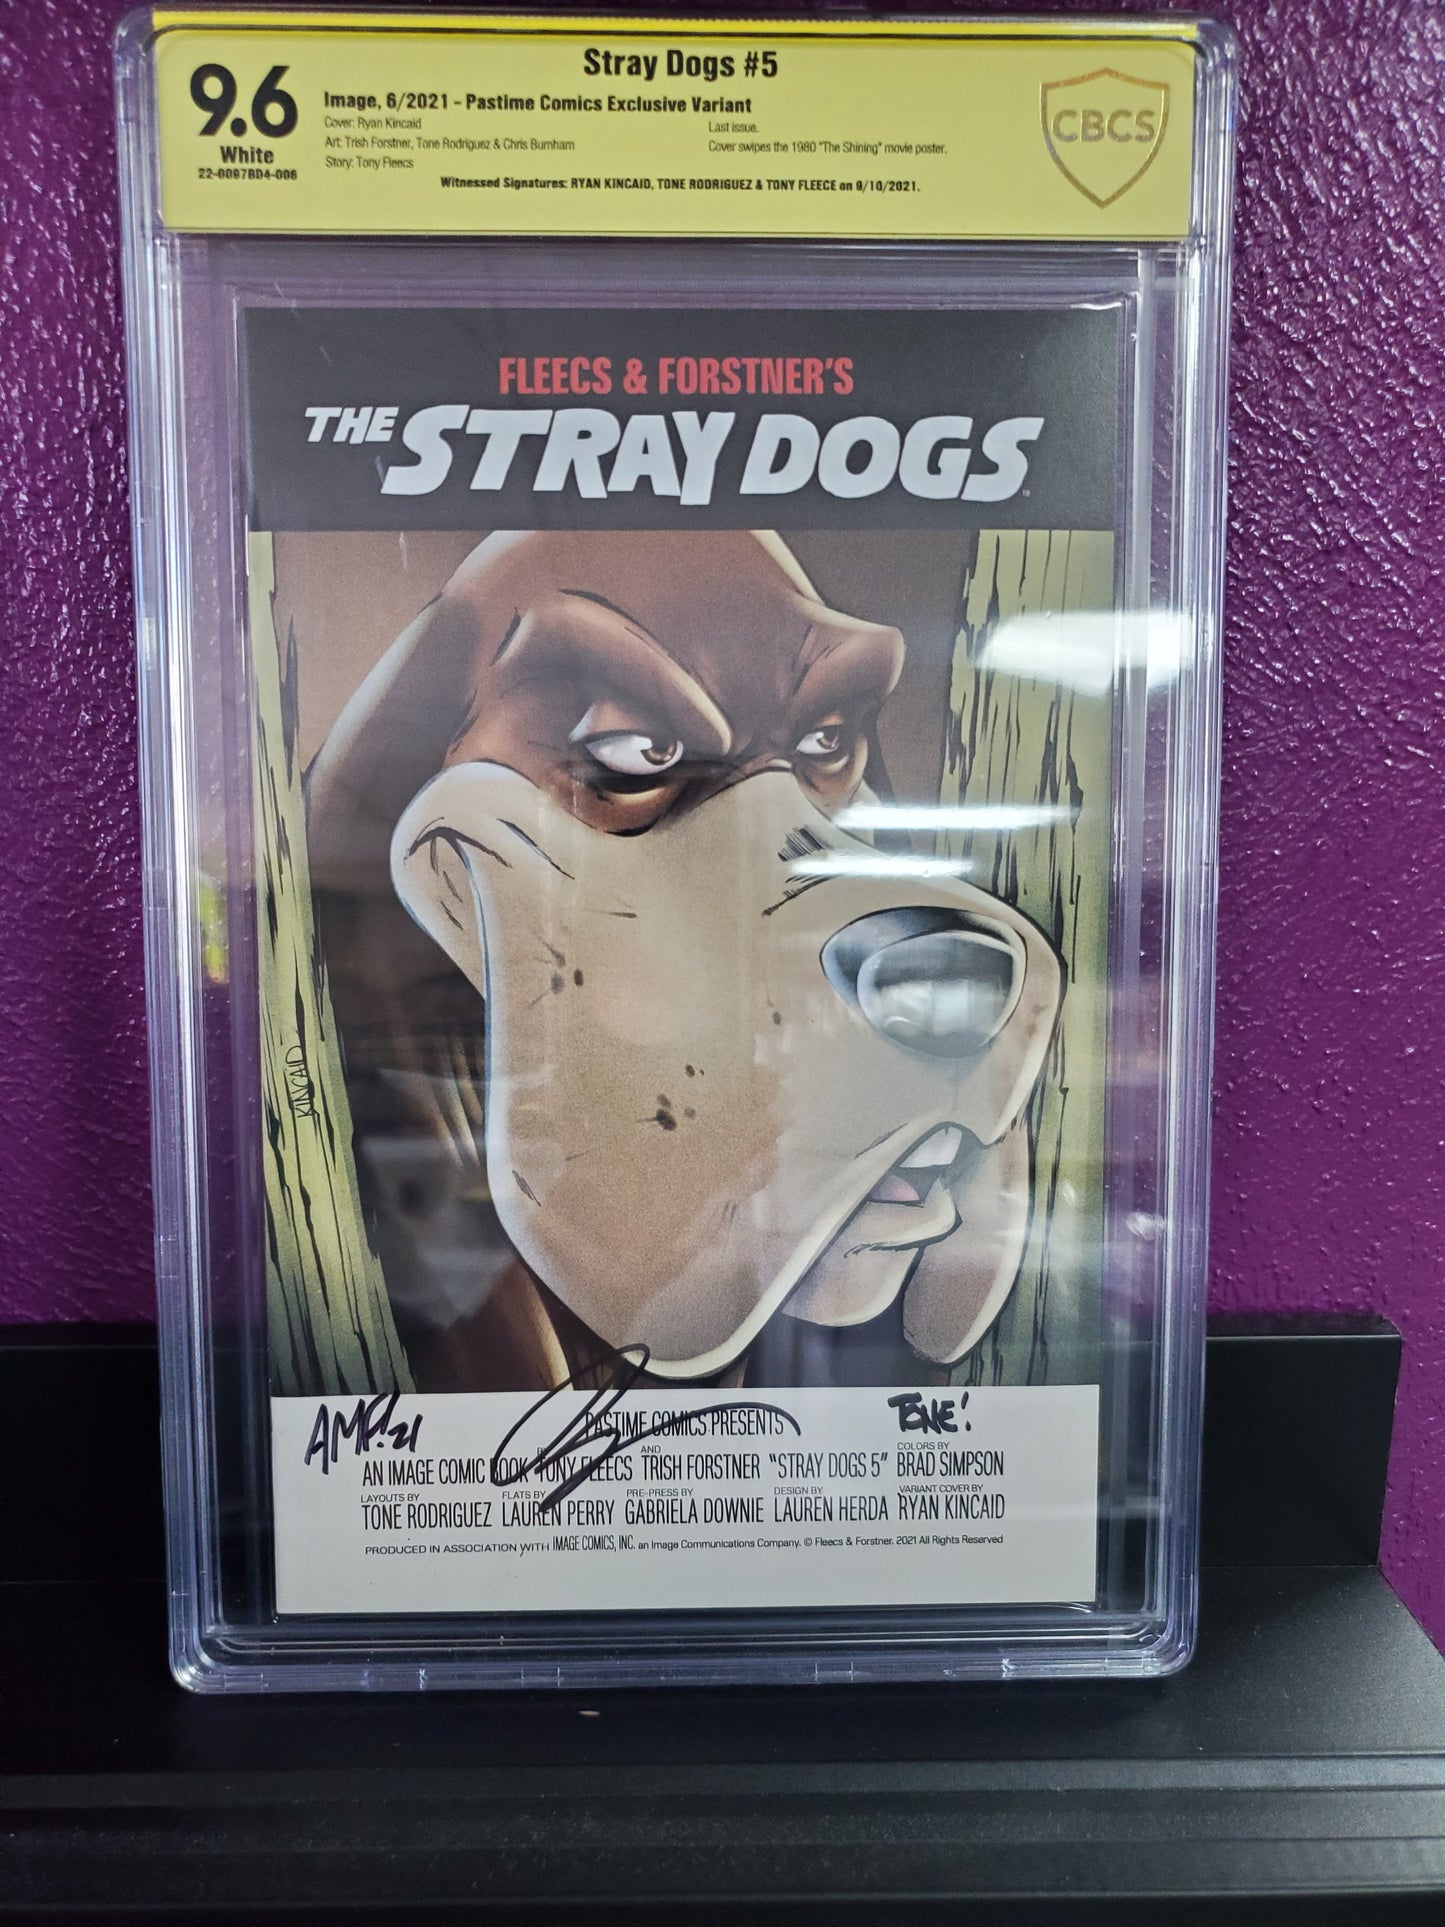 Image Stray Dogs #5 Pastime Exclusive Variant CBCS 9.6 (101322) SIGNED Key